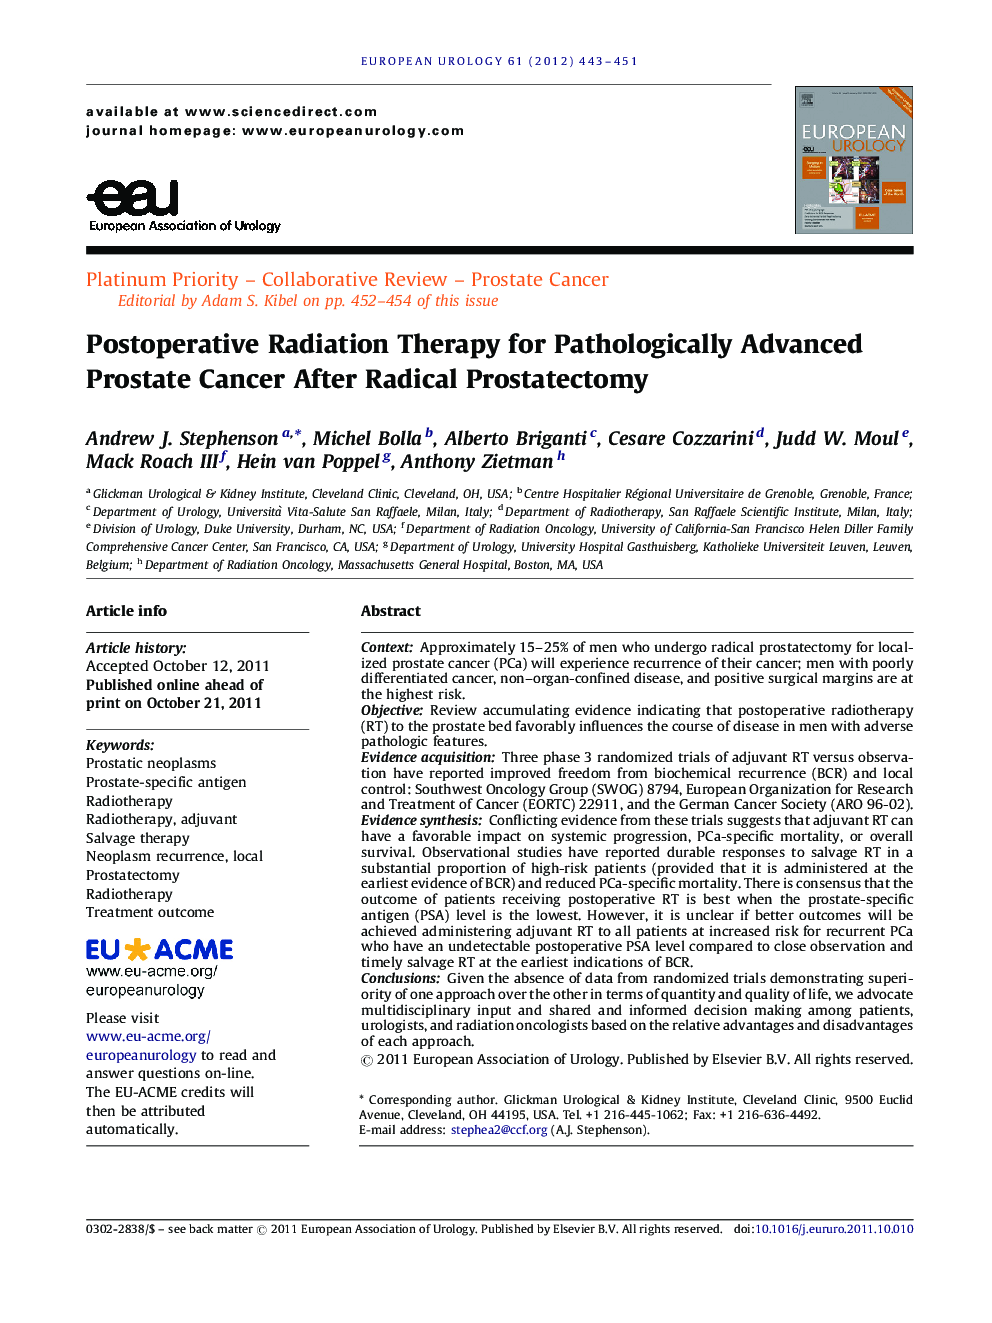 Postoperative Radiation Therapy for Pathologically Advanced Prostate Cancer After Radical Prostatectomy 